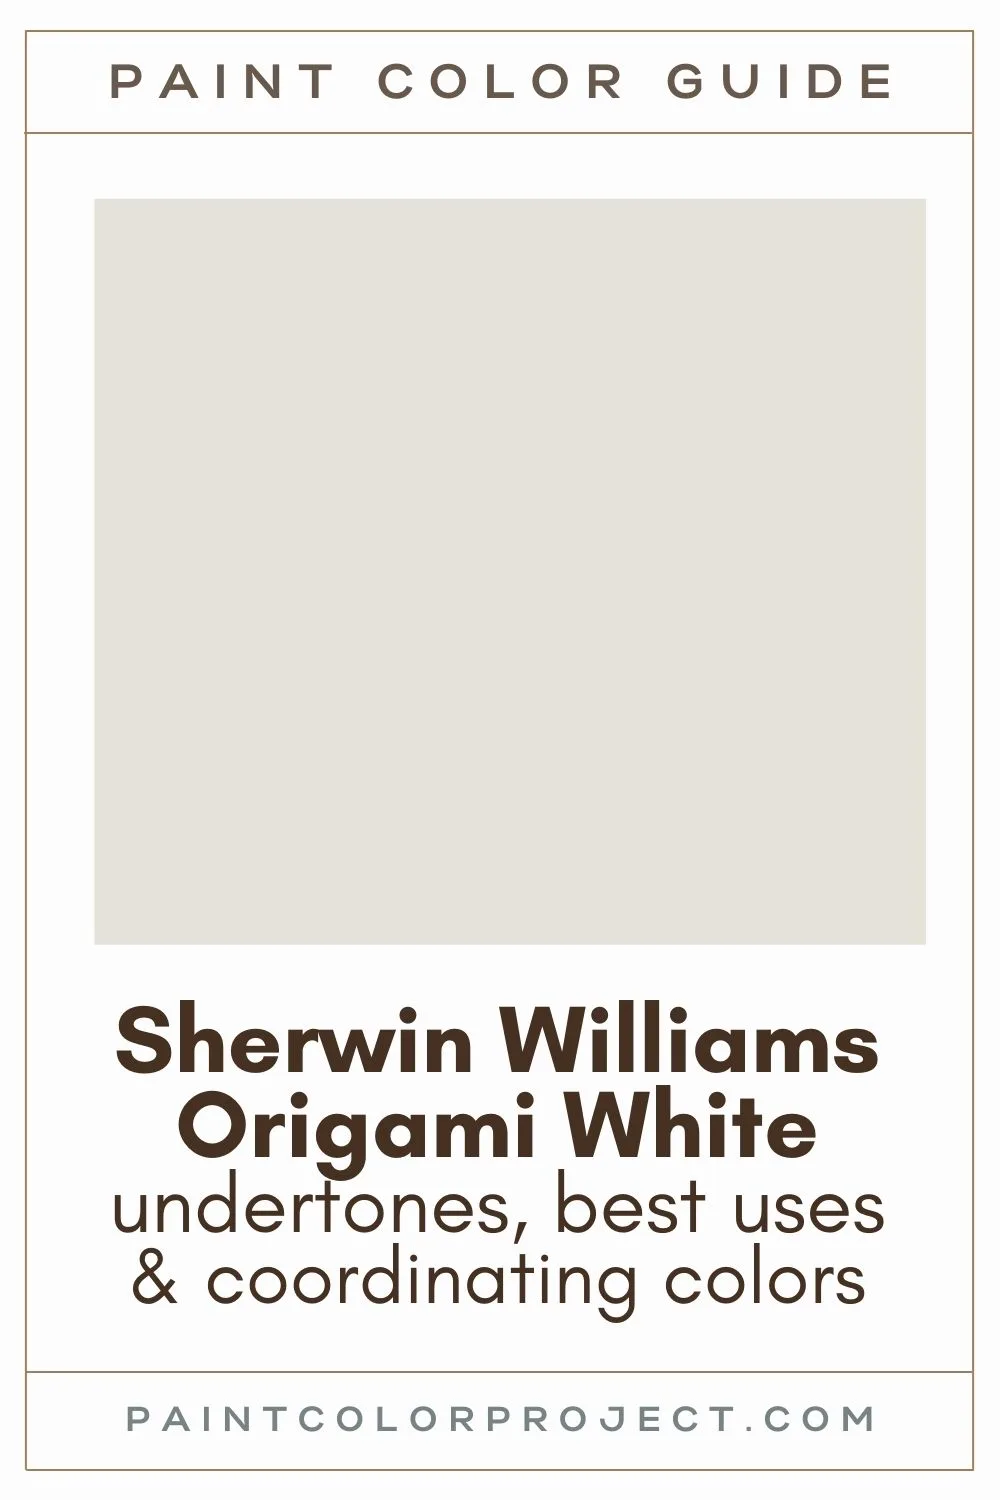 Sherwin Williams Origami White Paint Color Guide.